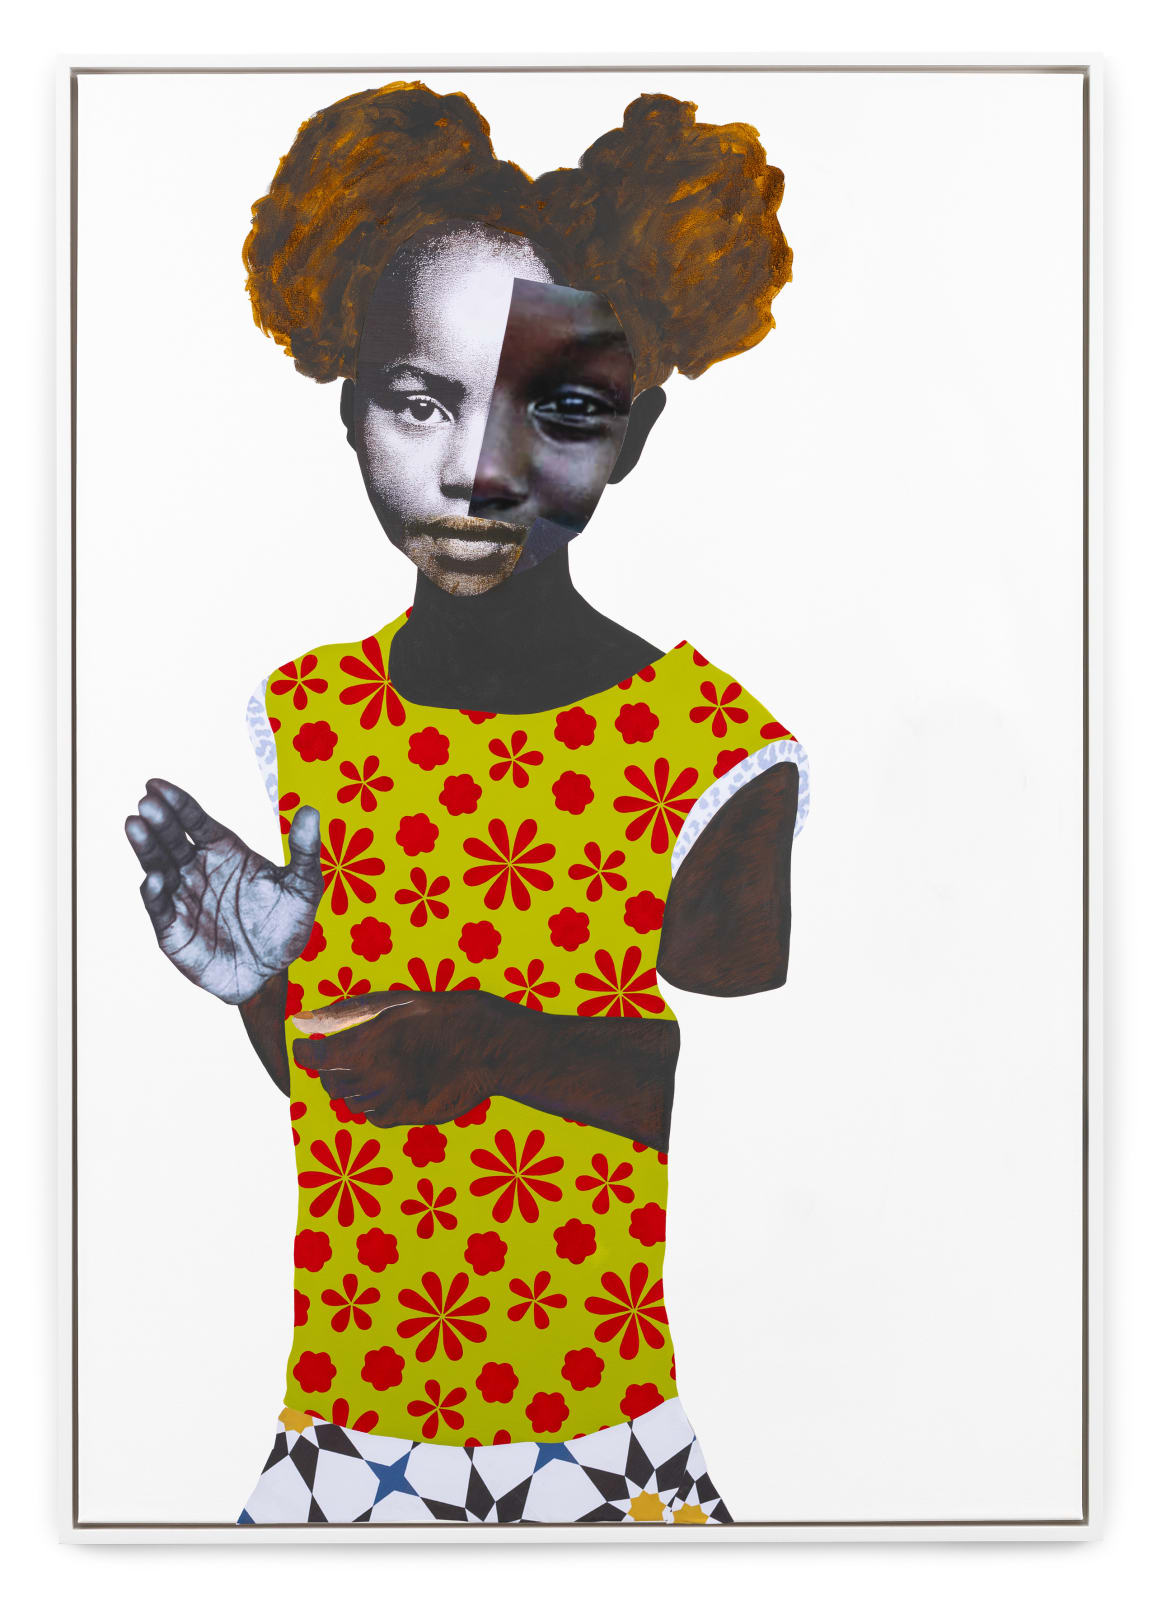 <div class="artist">Deborah Roberts</div><div class="title_and_year"><span class="title">Girl with the poofball hair and beautiful skin</span><span class="year">, 2022</span></div>